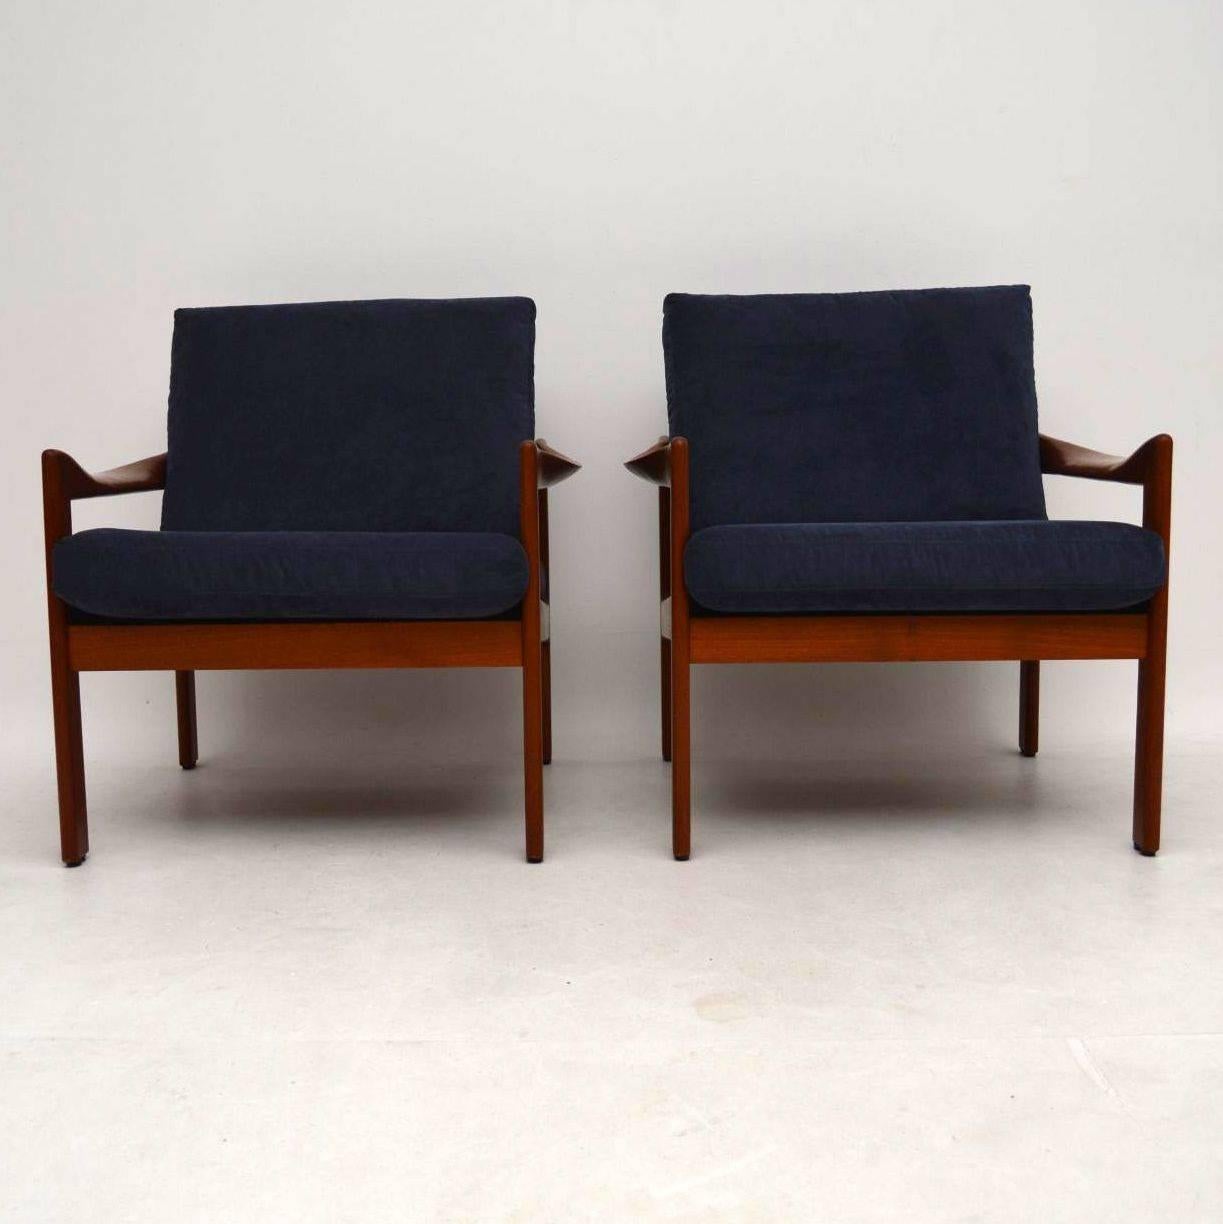 A stunning and rare pair of Danish vintage armchairs in solid teak, these were designed by Illum Wikkelso for Niels Eilersen and they date from the 1960s. The condition is superb for their age, the solid teak frames are clean, sturdy and sound; we